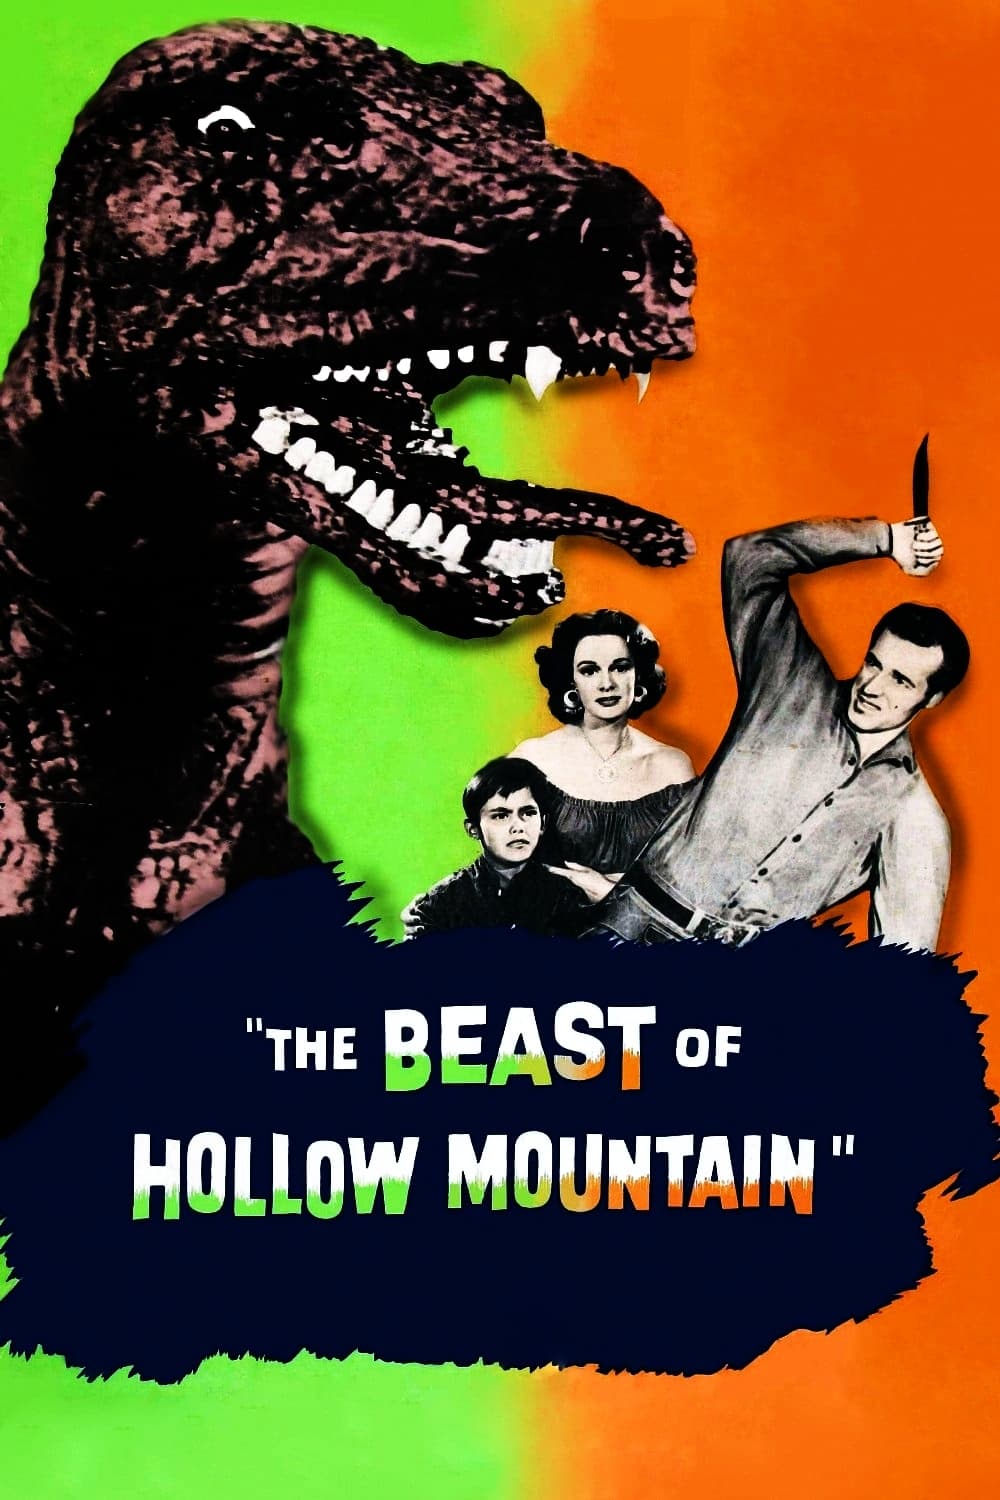 The Beast of Hollow Mountain (1956)